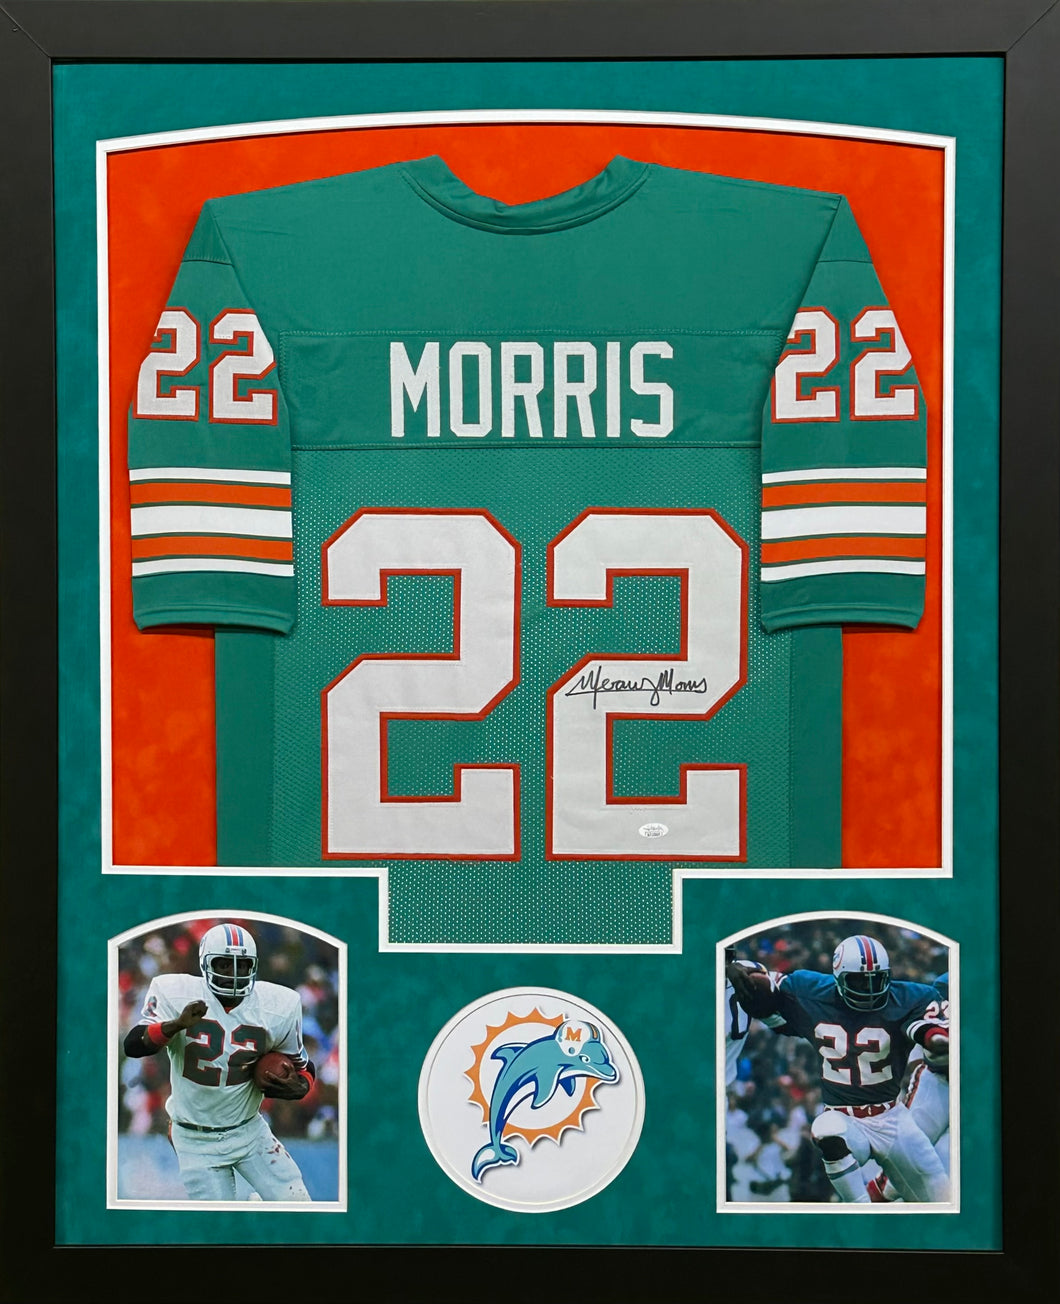 Miami Dolphins Mercury Morris Signed Custom Teal Jersey Framed & Suede Matted with JSA COA